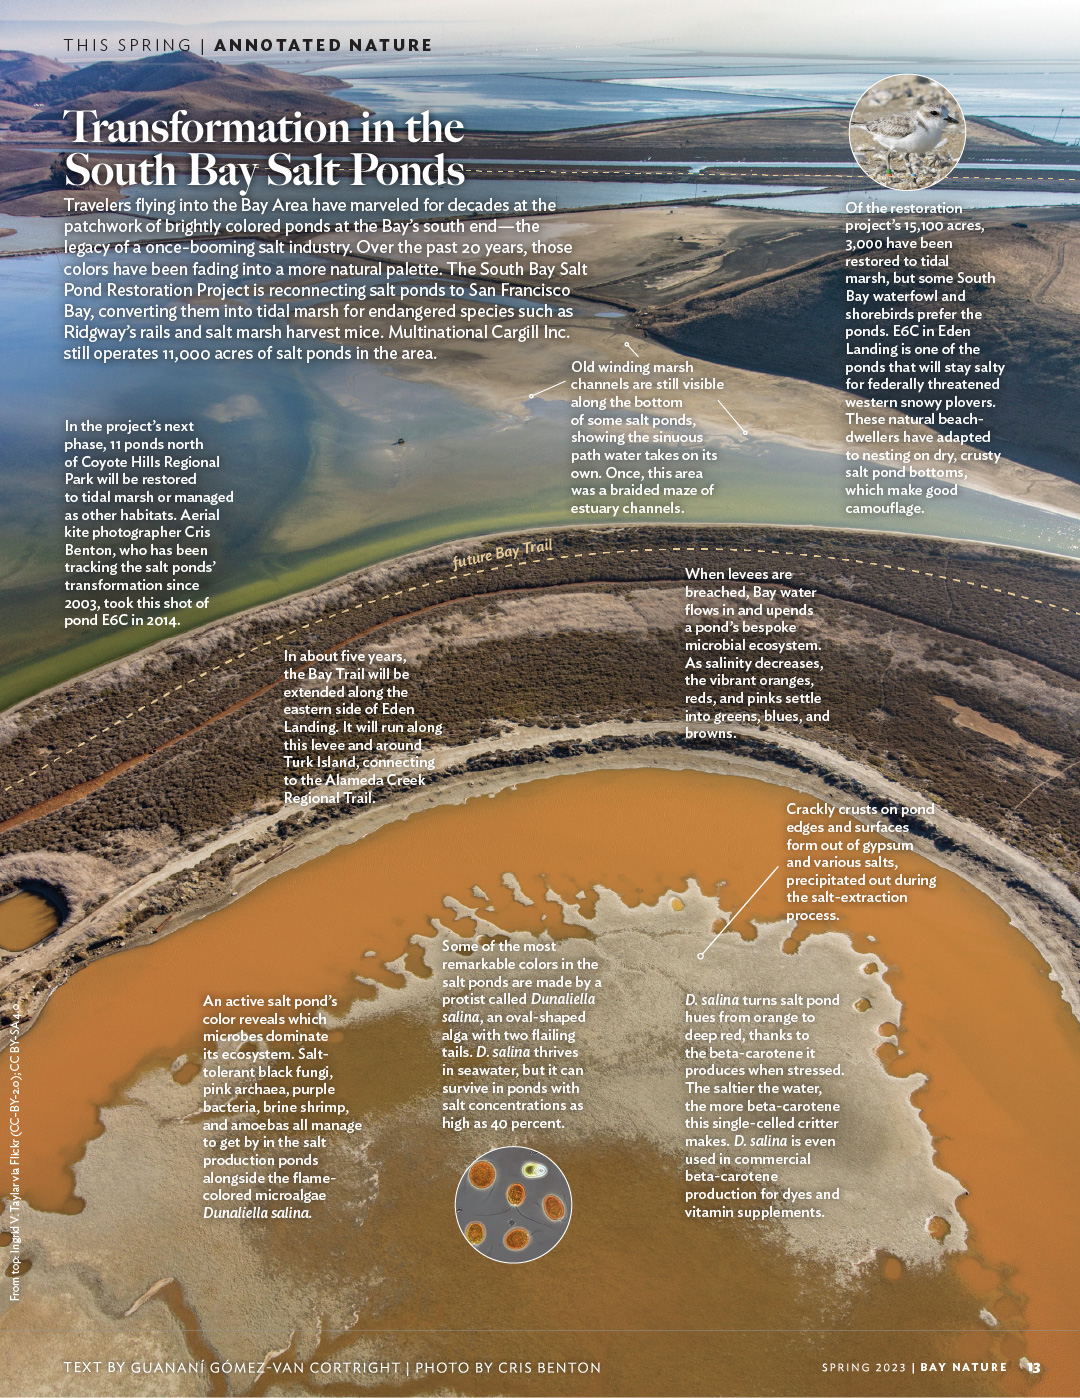 An aerial image of salt pond E6C by Cris Benton, annotated with information about the South Bay Salt Ponds, their brilliant colors, and their restoration.